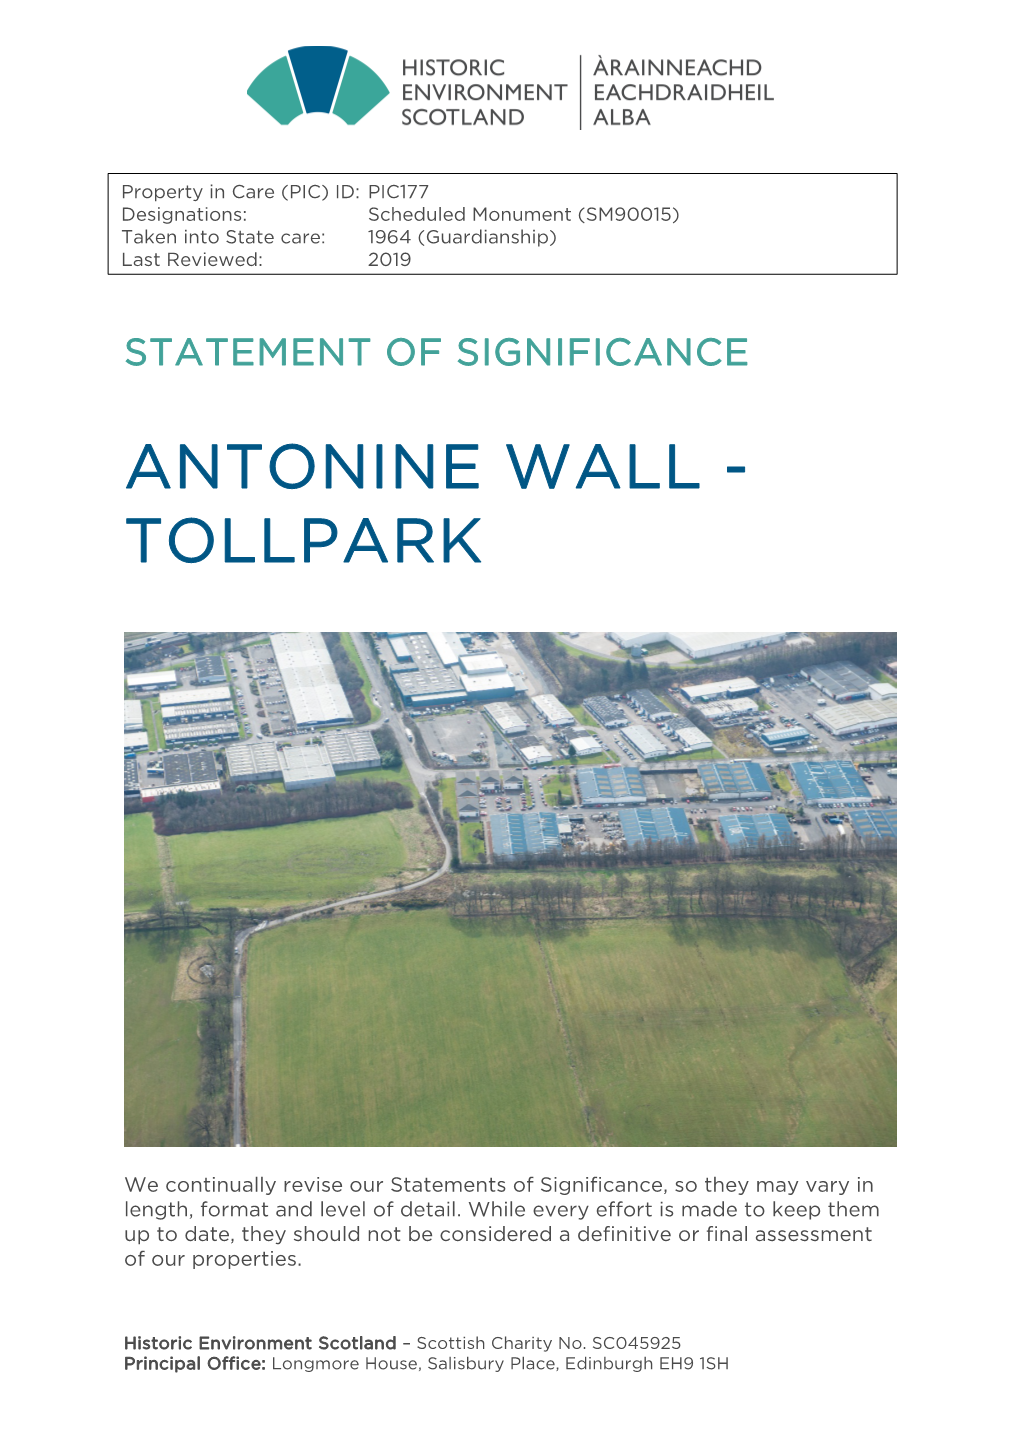 Antonine Wall Tollpark Statement of Significance